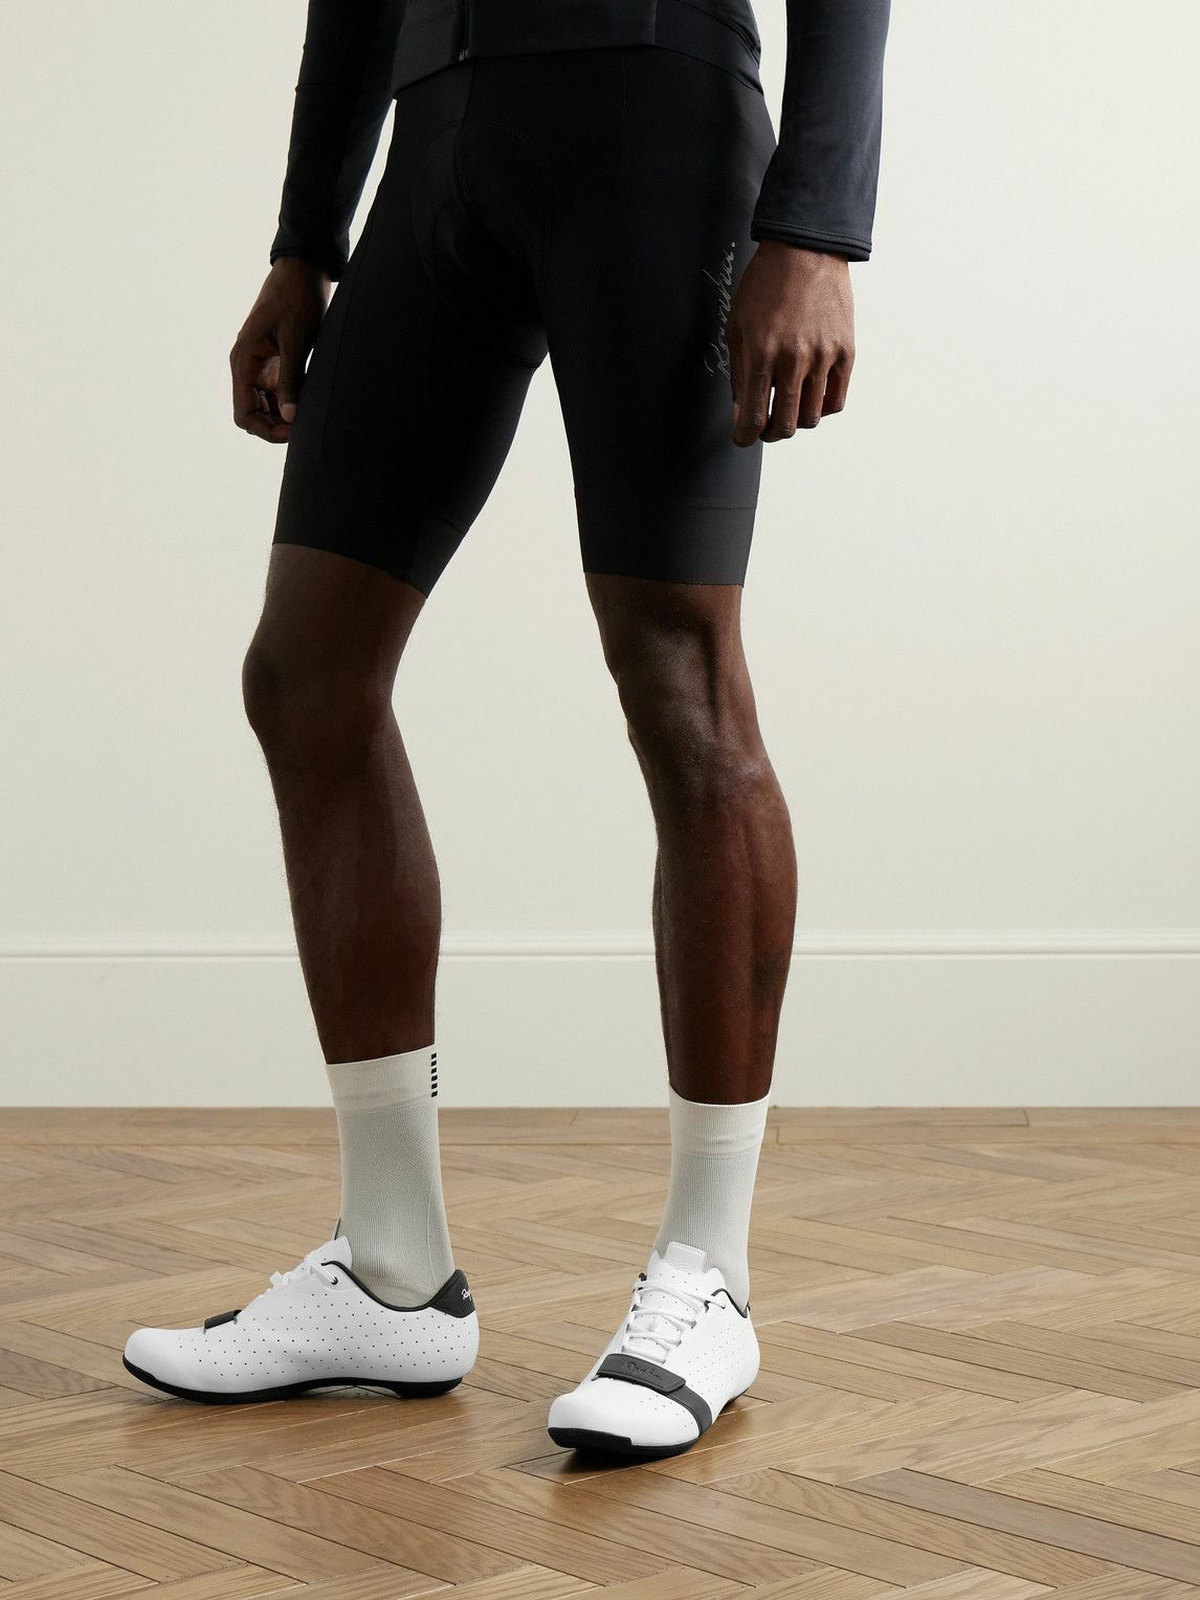 Rapha - Classic Perforated Microfibre Cycling Shoes - White Rapha